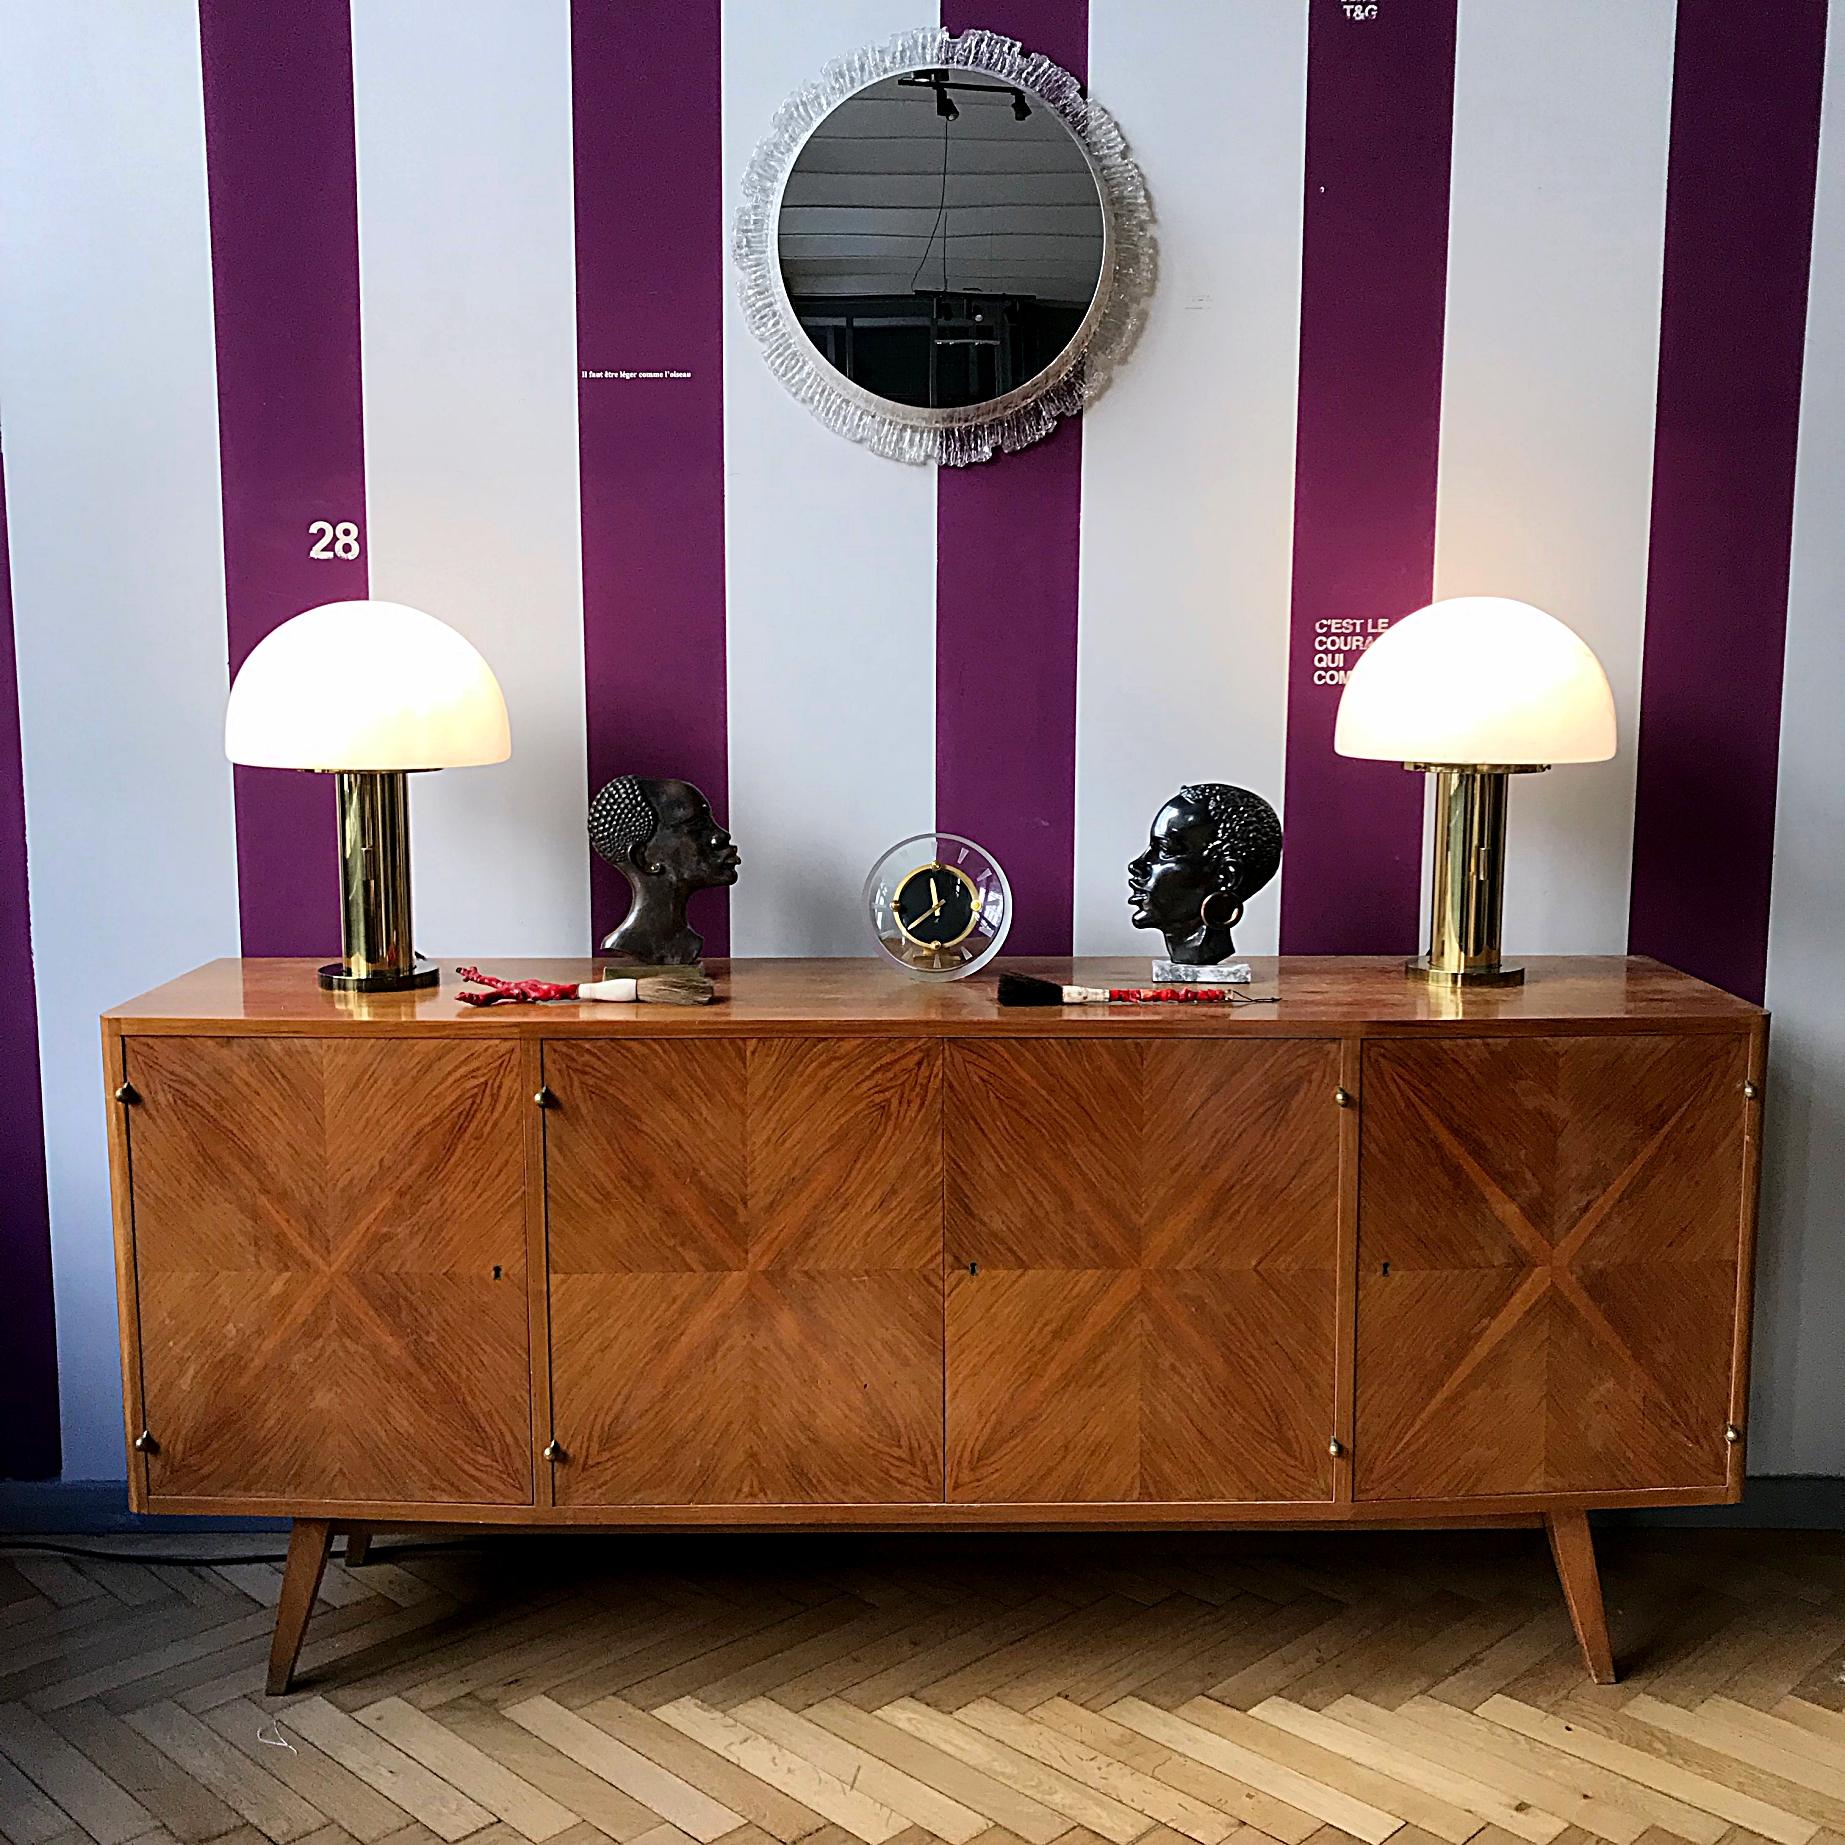 Pair of elegant Space Age sideboard lamps manufactured by Glashütte Limburg in Germany. The lamps are made of brass with the rare mouth-blown lampshade that contain air bubbles providing a smooth and wonderful light. The lamps are in very good